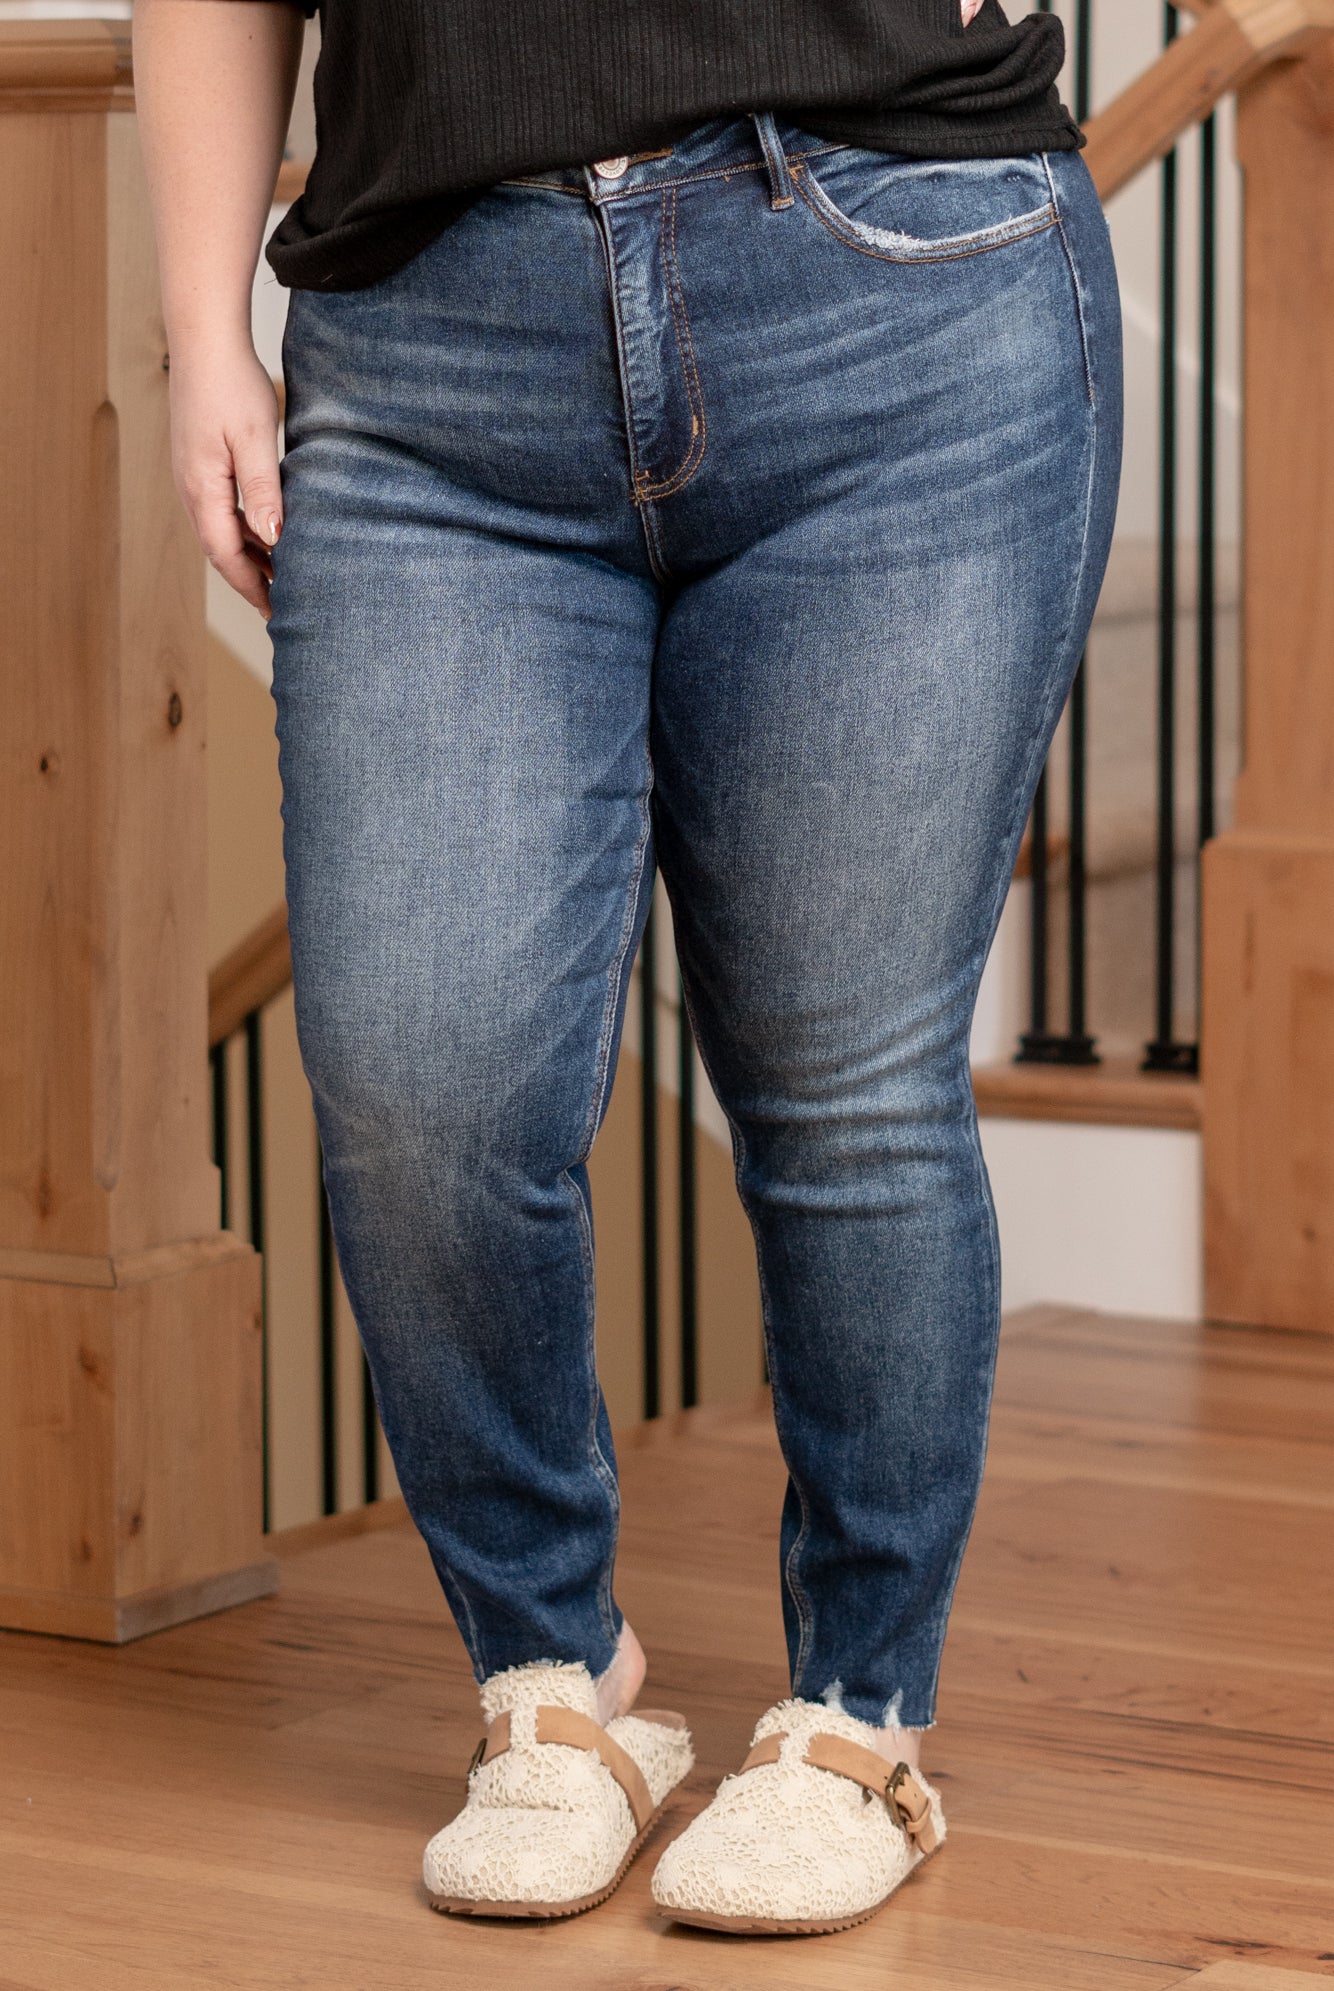 Lovervet by VERVET   Make a bold statement with the Non-Violence High Rise Cropped Skinny jeans featuring a distressed hem. These jeans boast a high-rise silhouette and a cropped skinny fit, providing a flattering and on-trend look. The distressed hem adds a touch of edginess, making them a versatile choice for both casual and elevated looks.